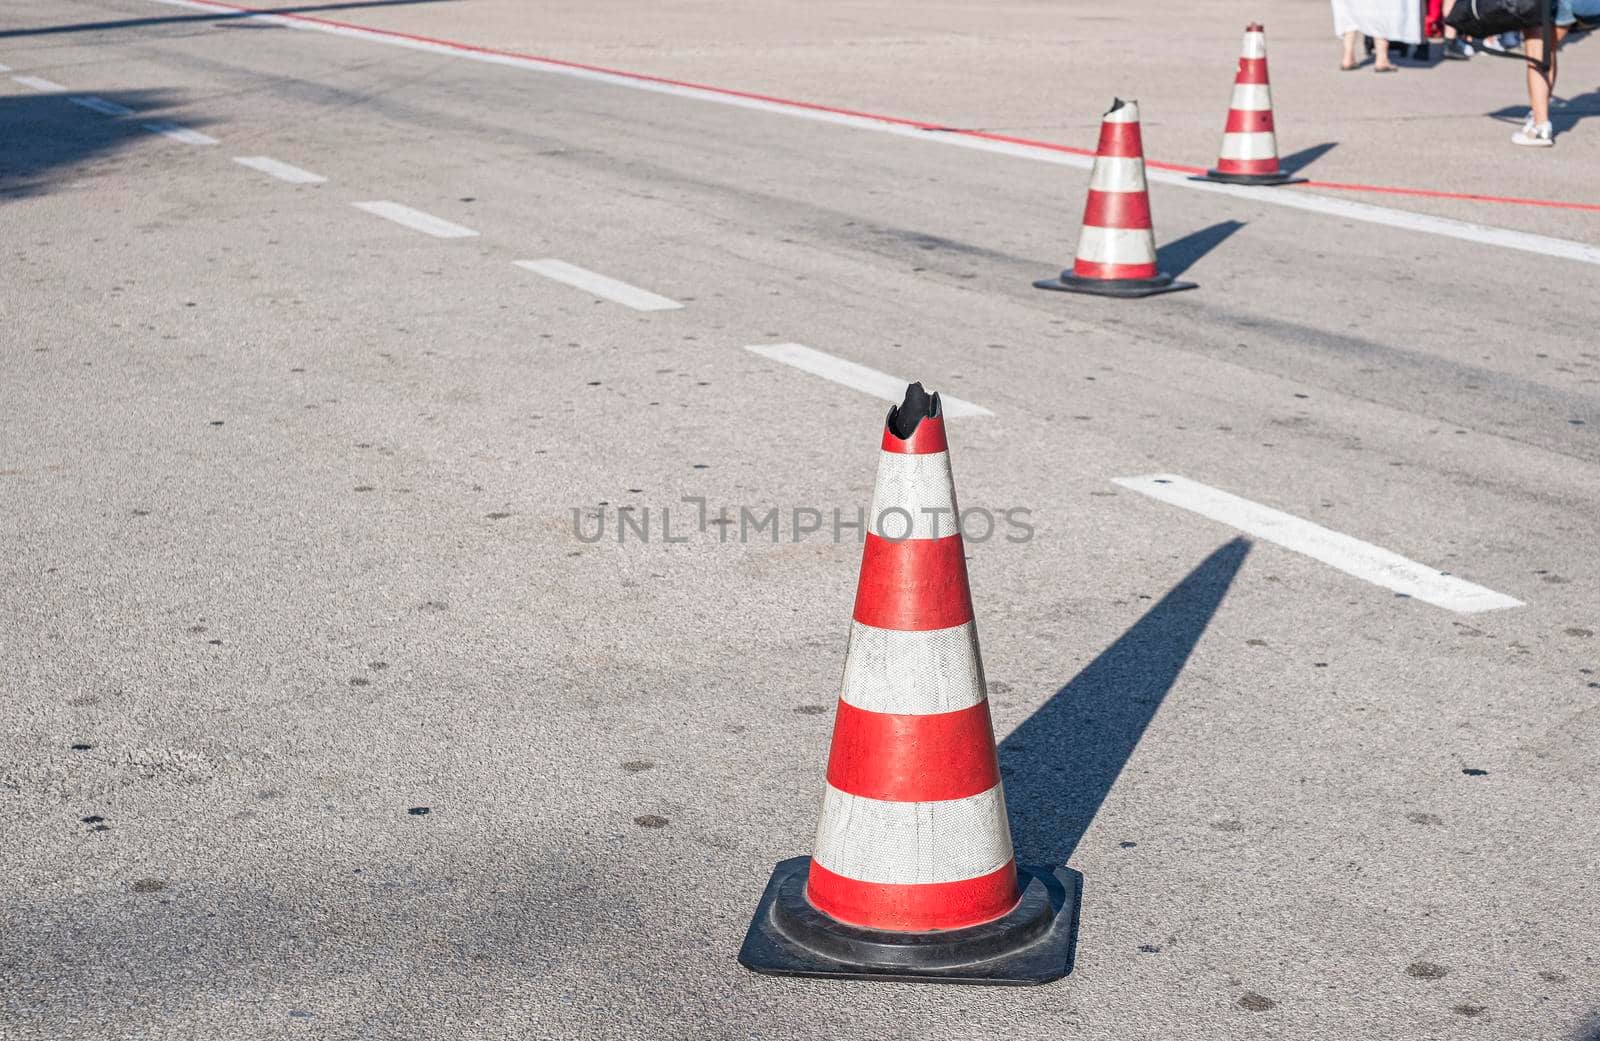 Traffic cone with white and red stripes on the road of the airport. Safety cone.